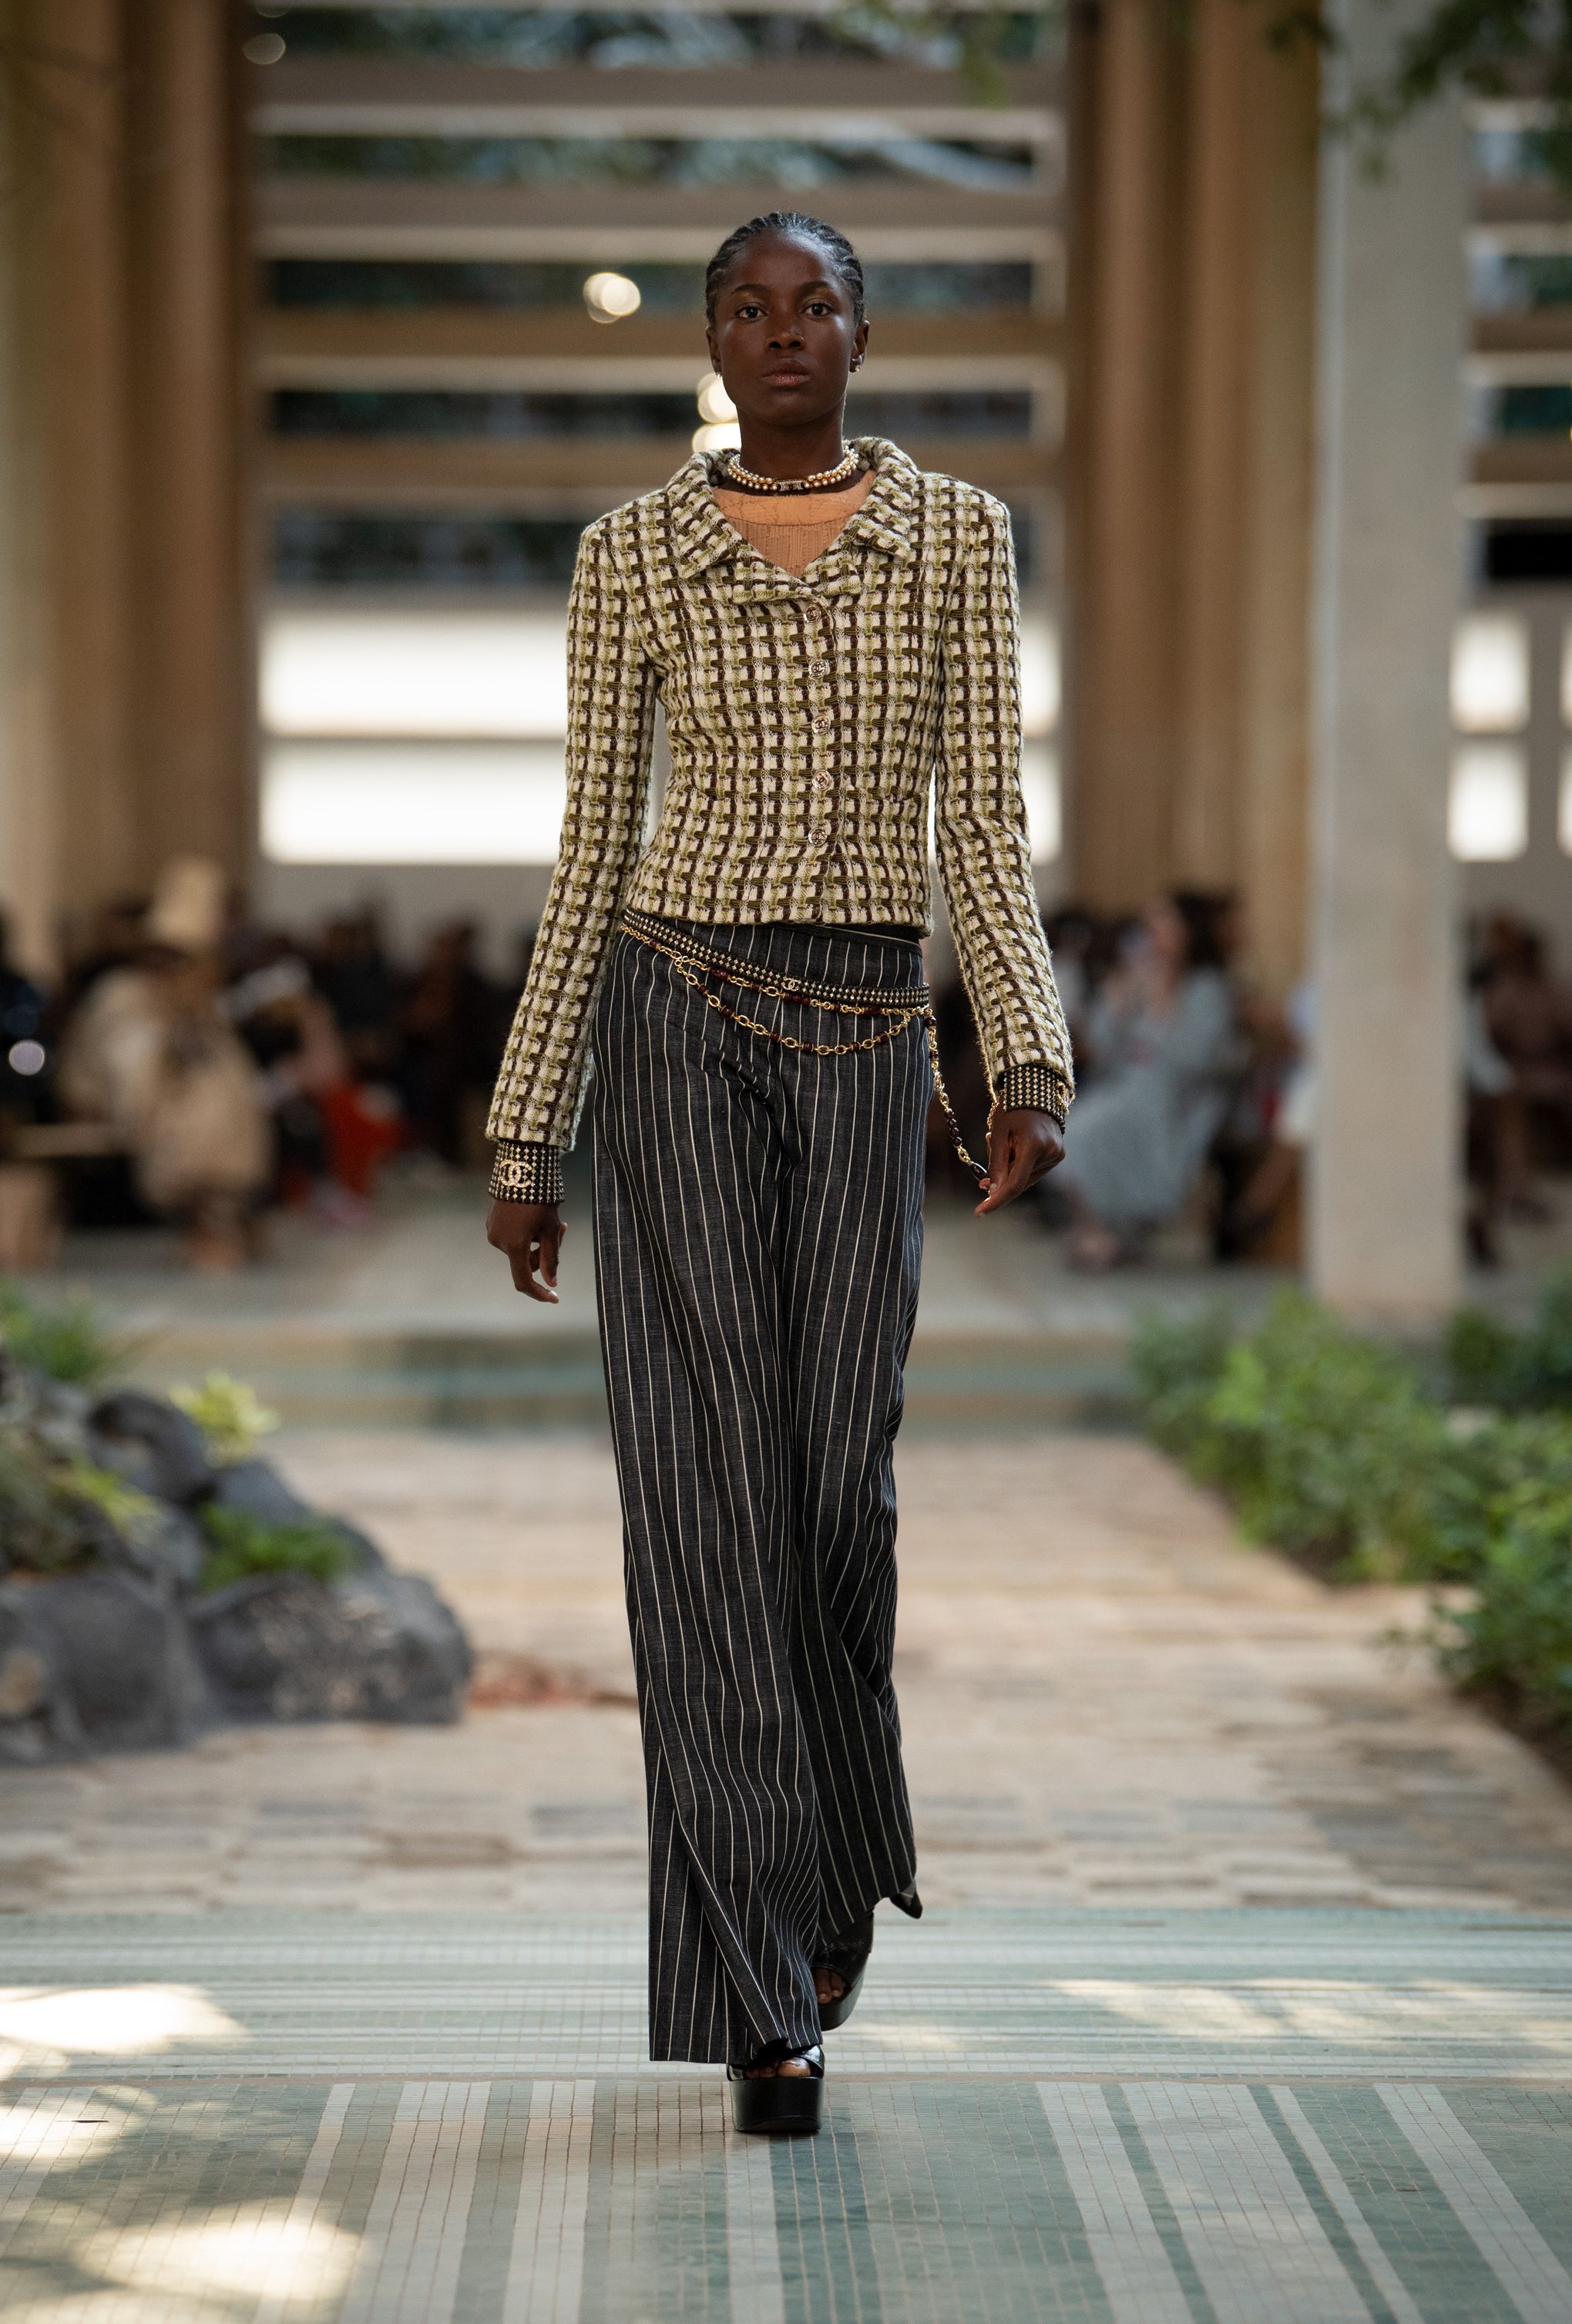 Highlights from Chanel's Métiers d'art show in Senegal